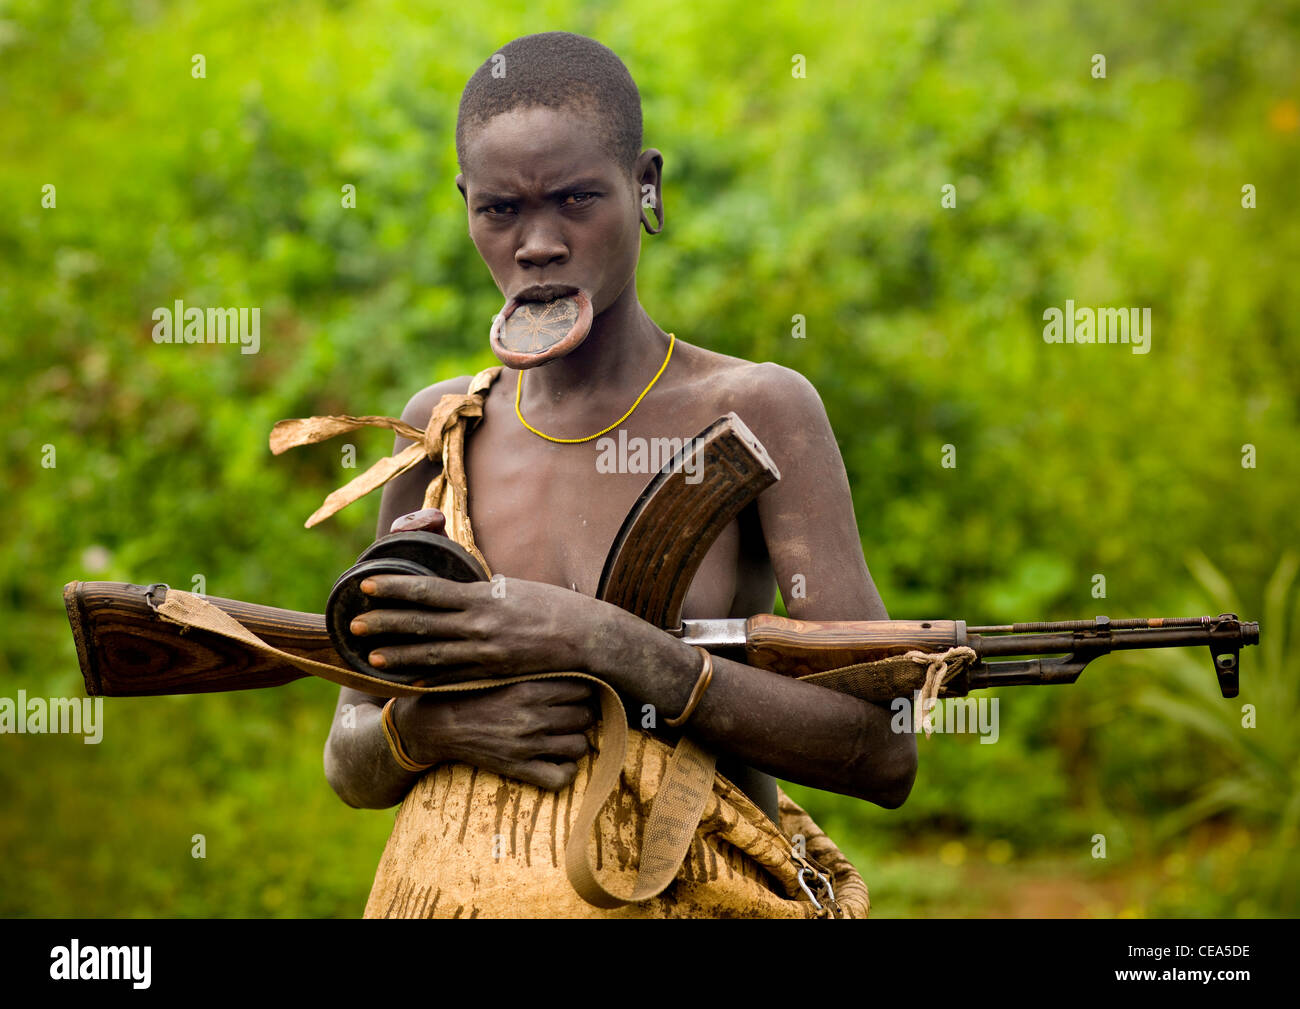 Lip Plate Woman With Kalashnikov Rifle And Two Clay Plates In Her Hands Ethiopia Stock Photo